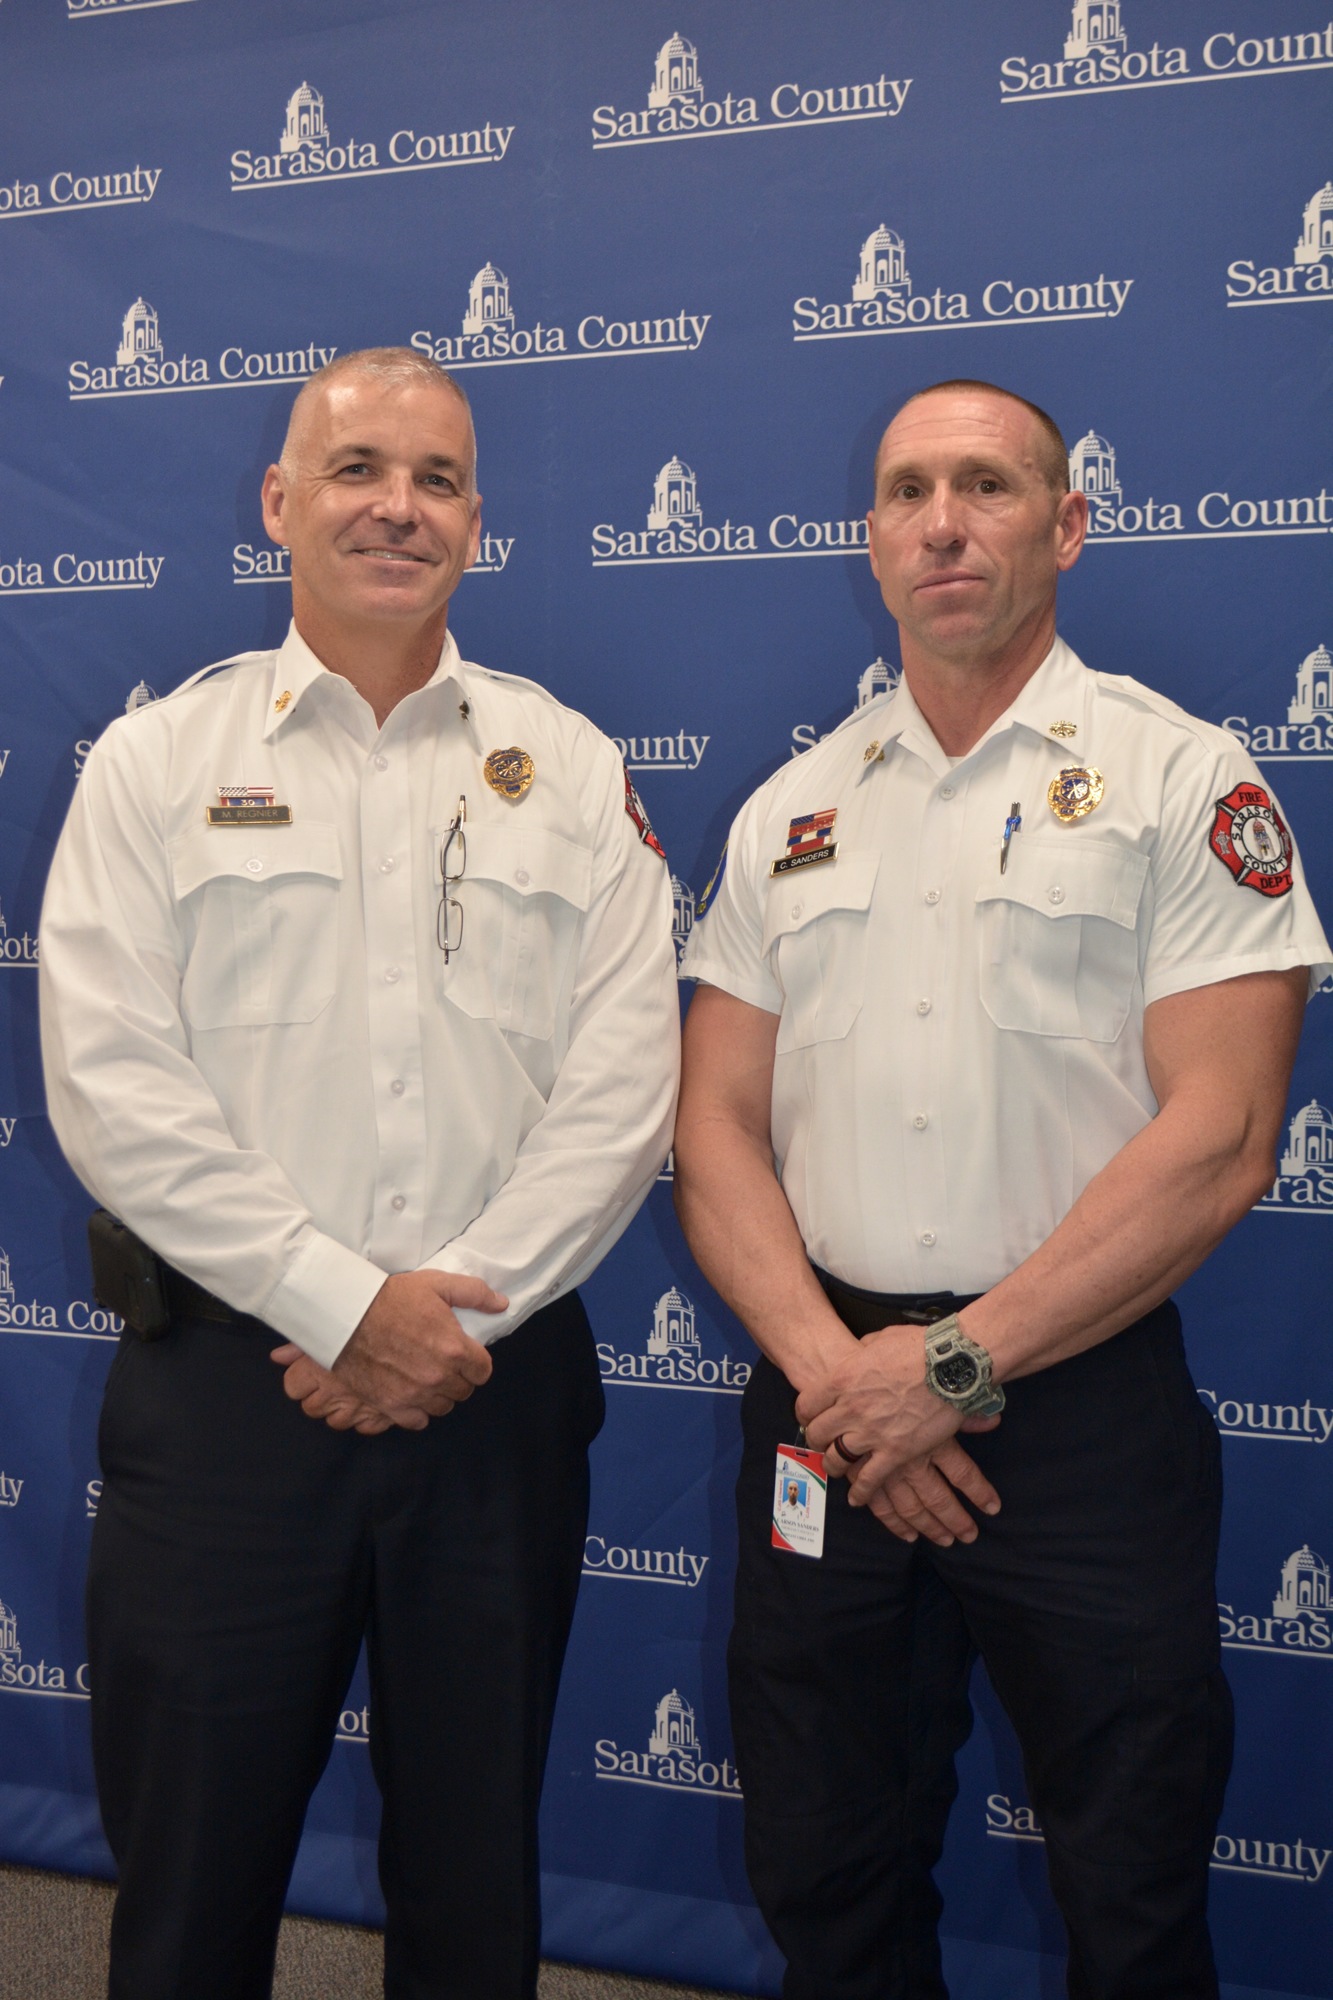 Chief Michael Regnier and Assistant Chief Carson Sanders